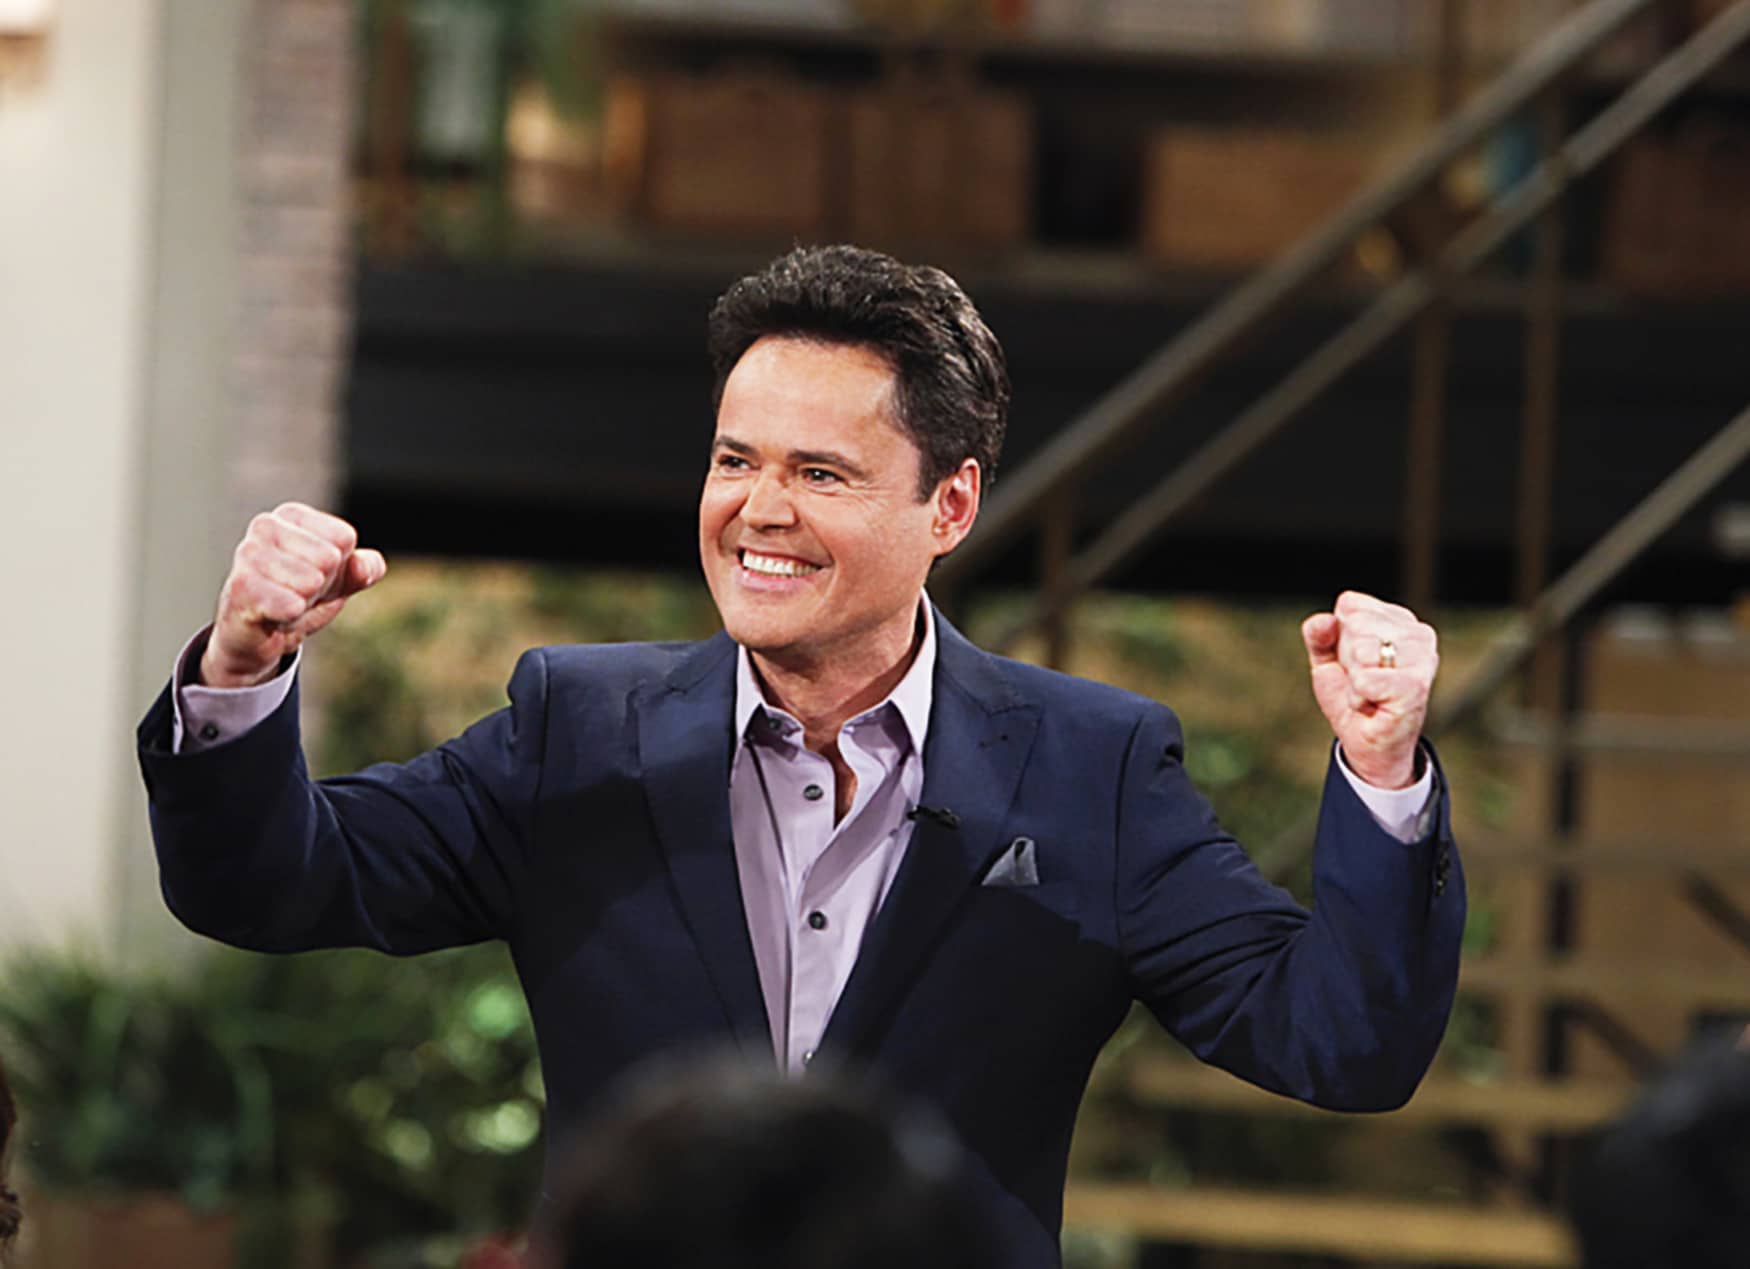 THE TALK, guest co-host Donny Osmond